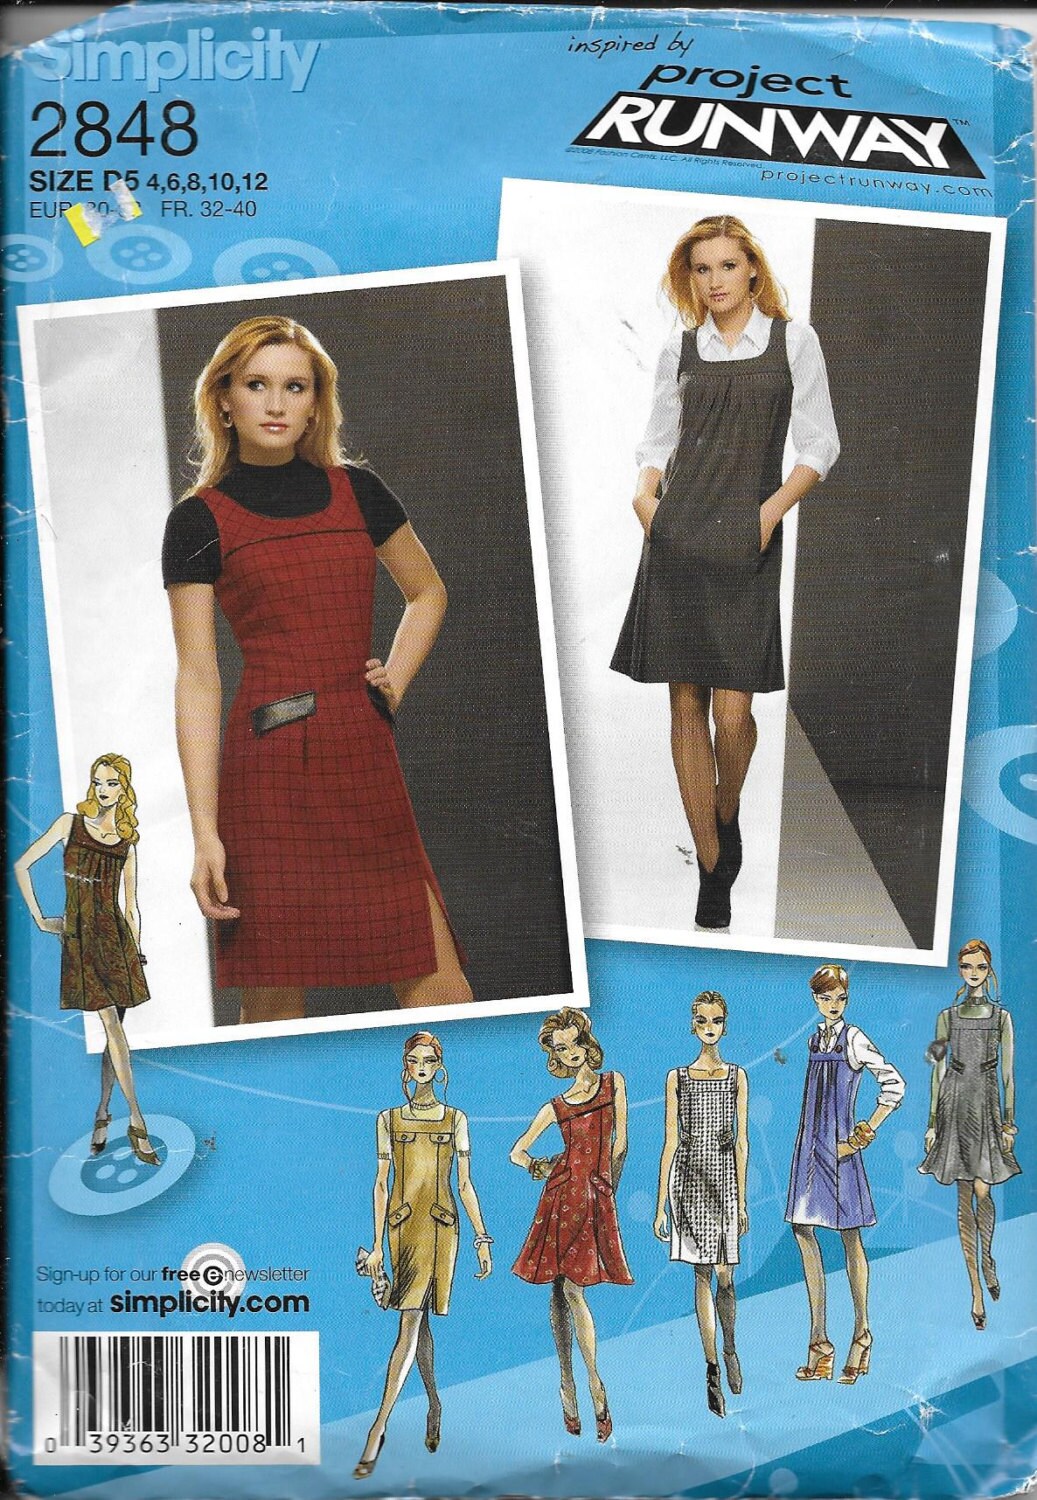 Dress Patterns Misses' Size 12 14 16 18 20 Loose-Fitting Slightly Flared Dresses Sleeveless Project Runway Simplicity Sewing Pattern 3529